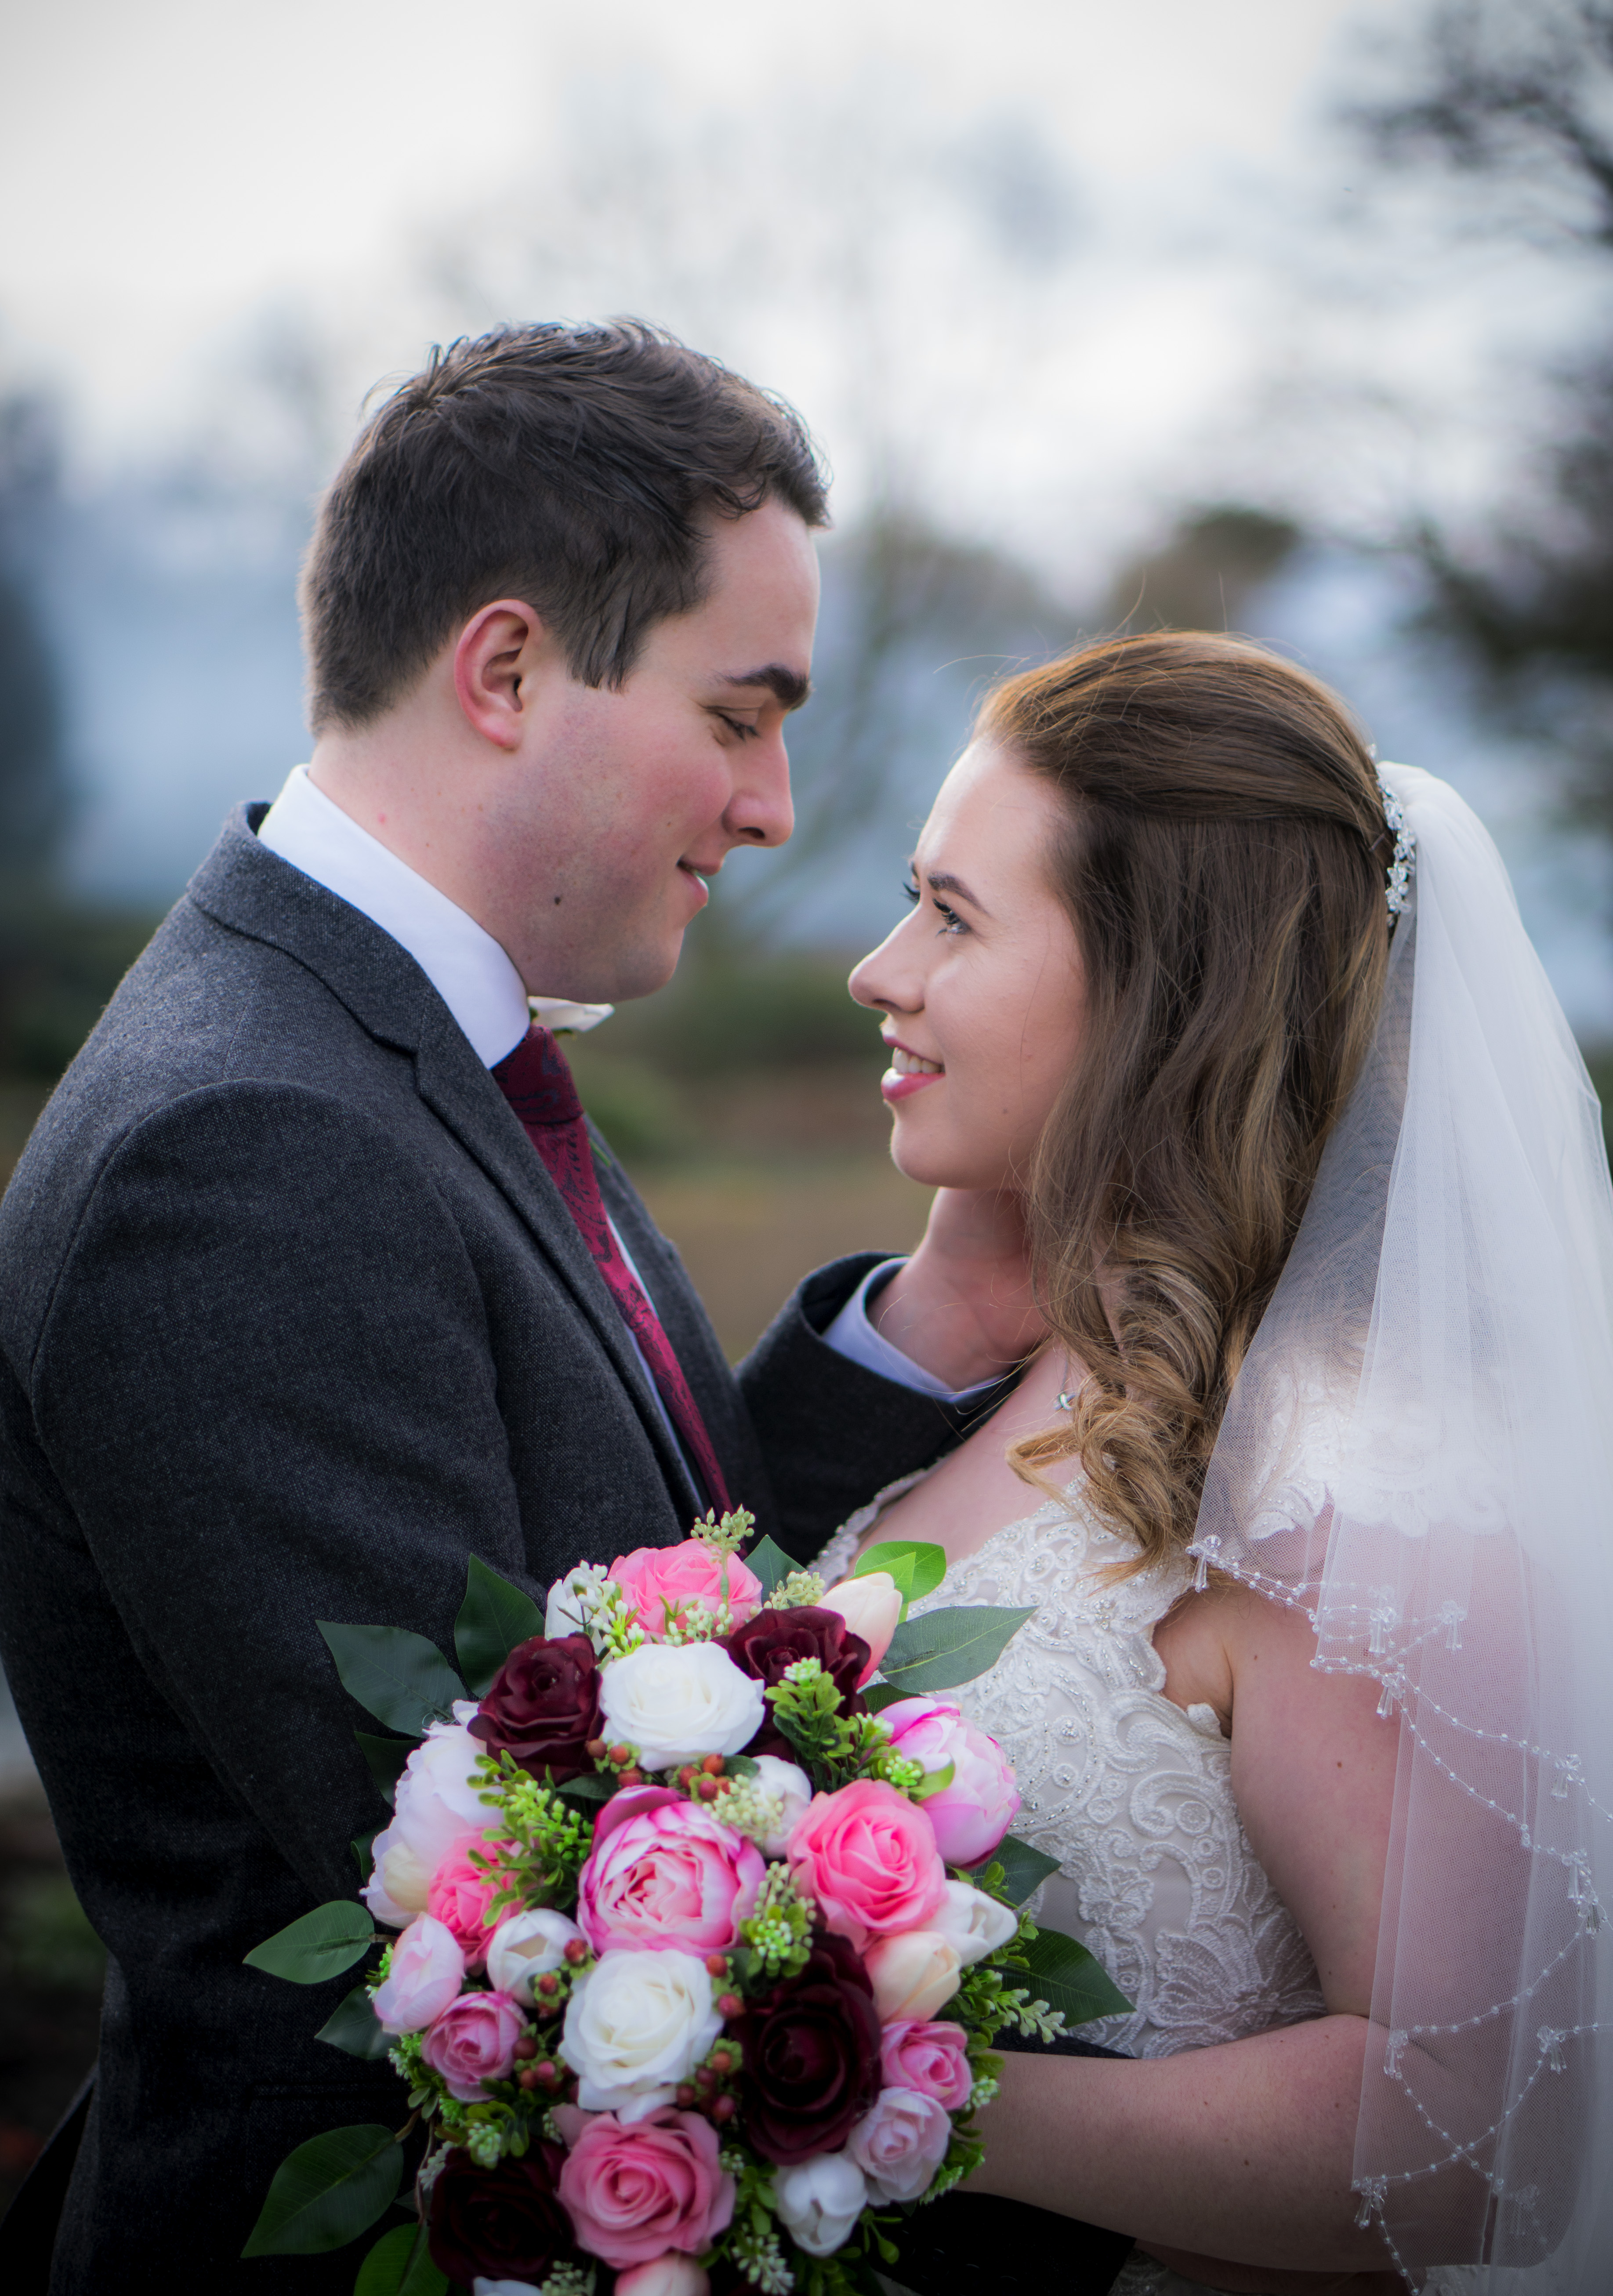 iBlessphotography Kirstie and Michael Wedding_11